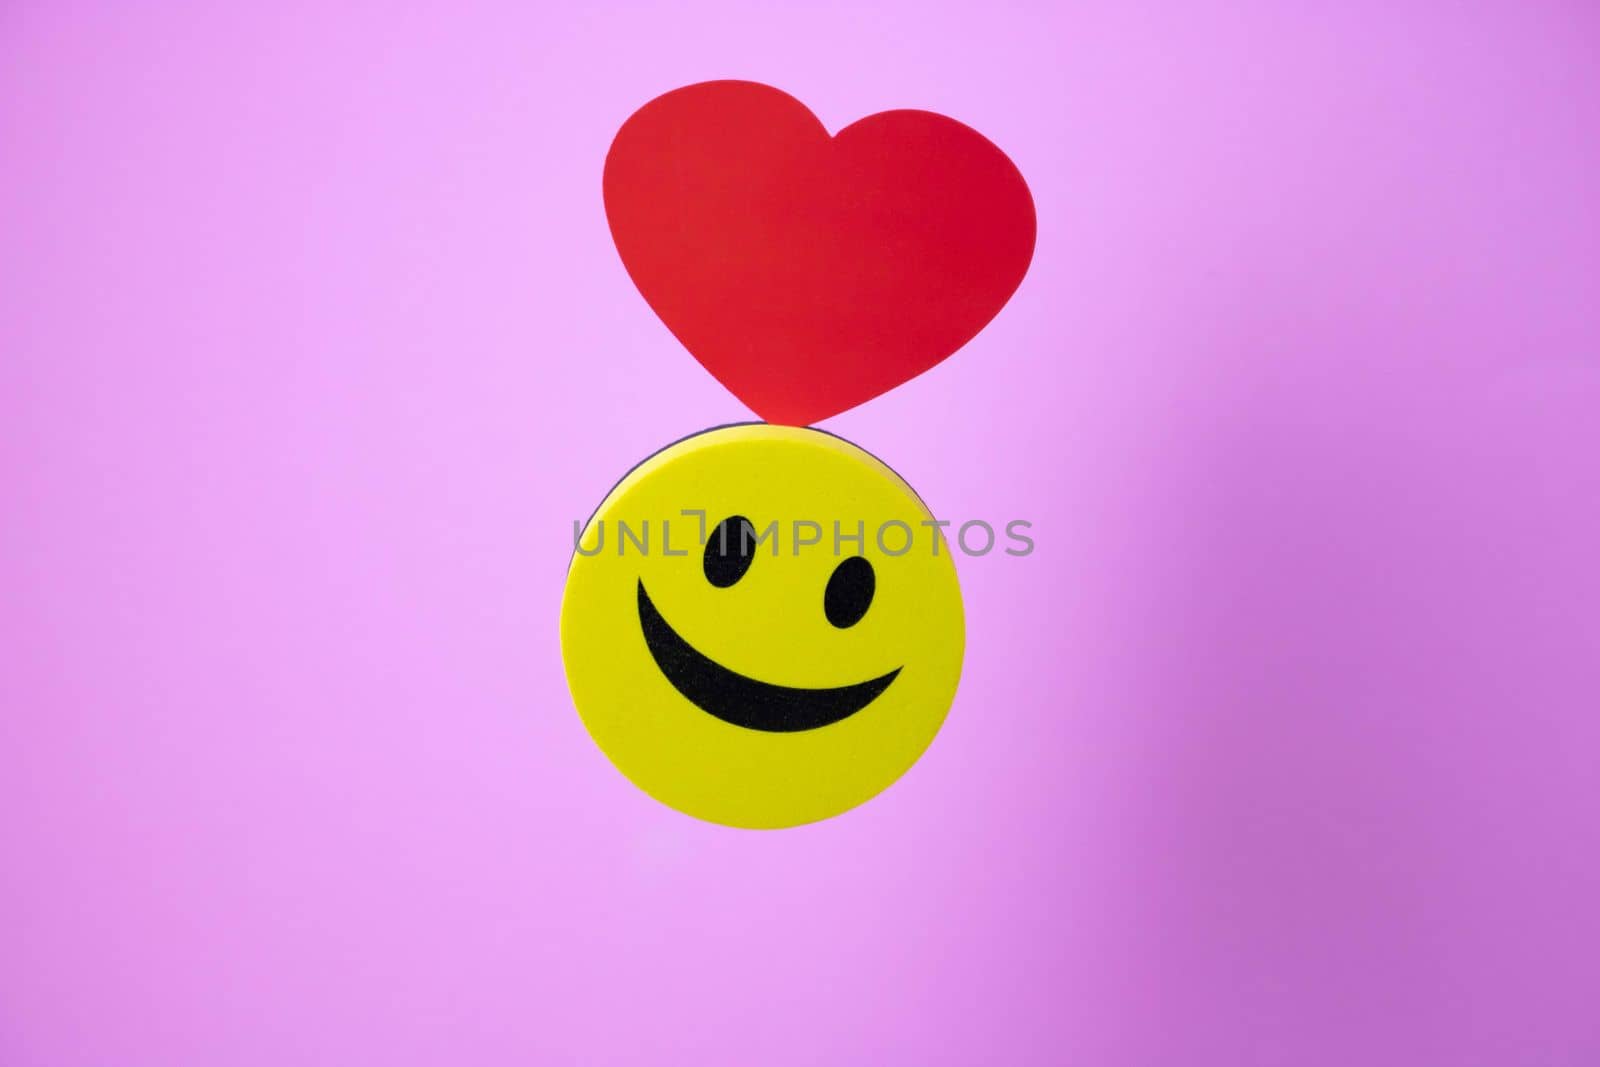 Smiley face with a red heart and its shadow on a pink background.